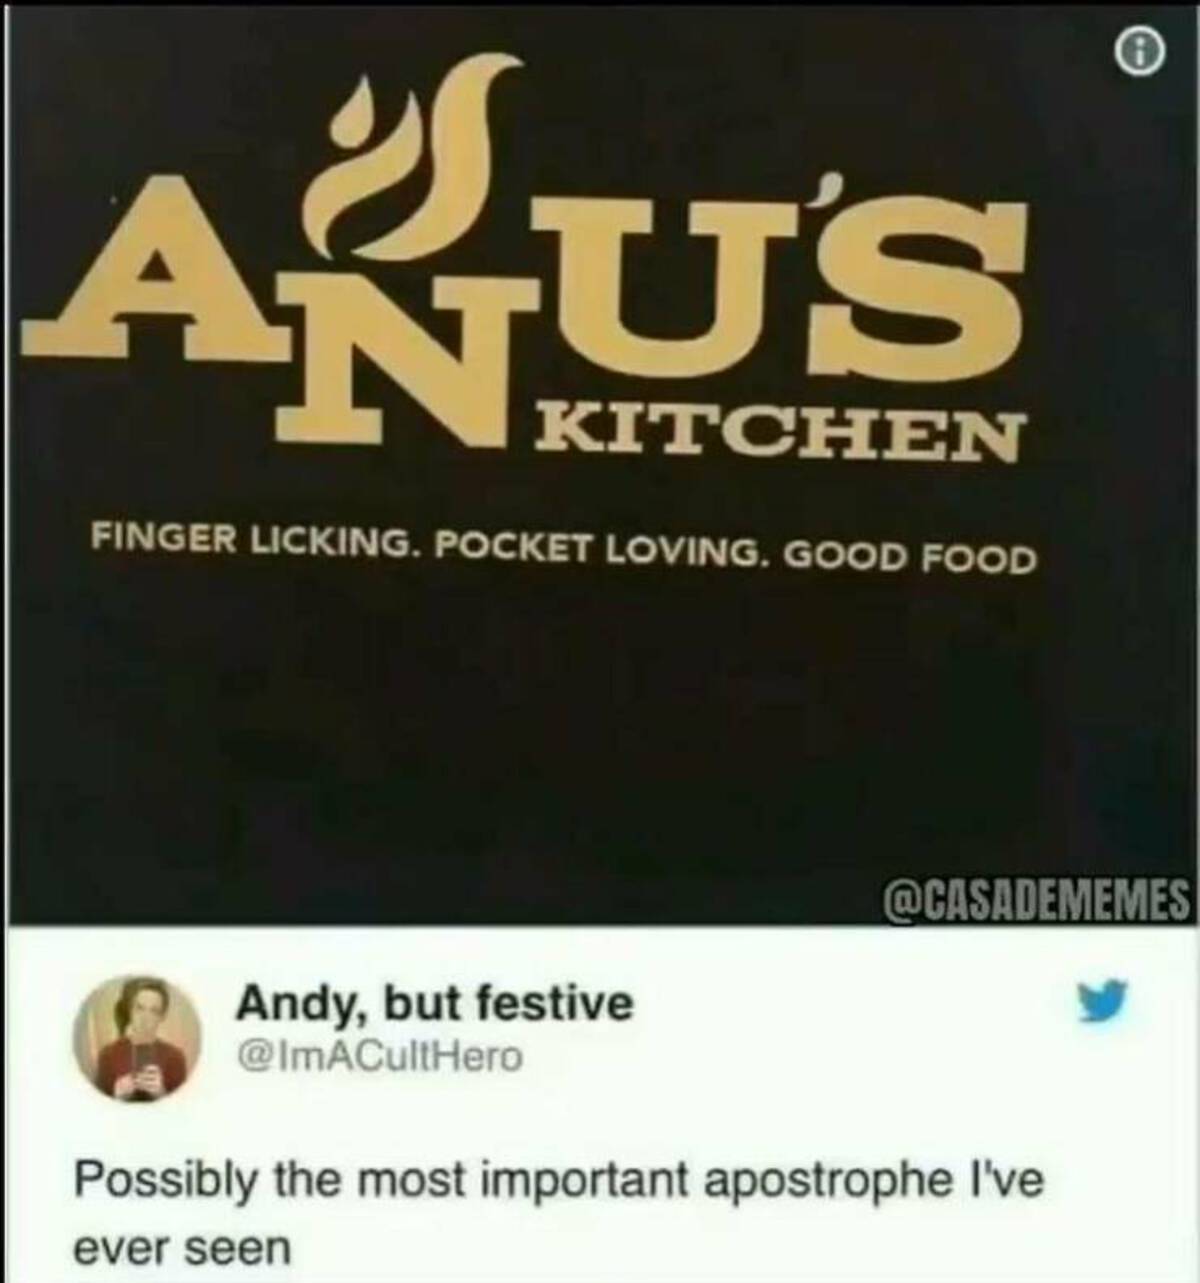 screenshot - U'S Kitchen Finger Licking. Pocket Loving. Good Food Andy, but festive Possibly the most important apostrophe I've ever seen